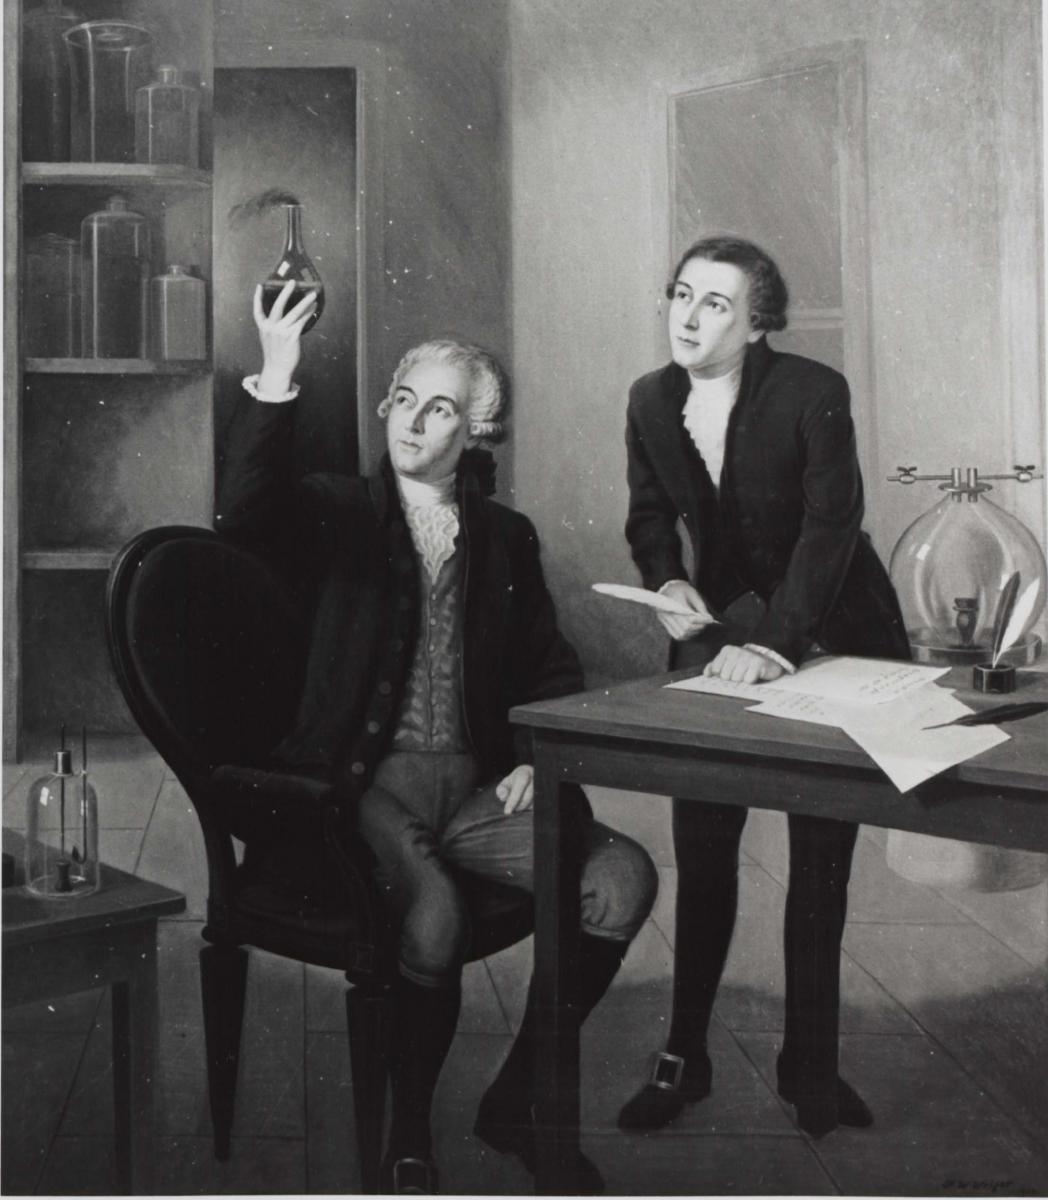 Lavoisier and du Pont study chemistry together